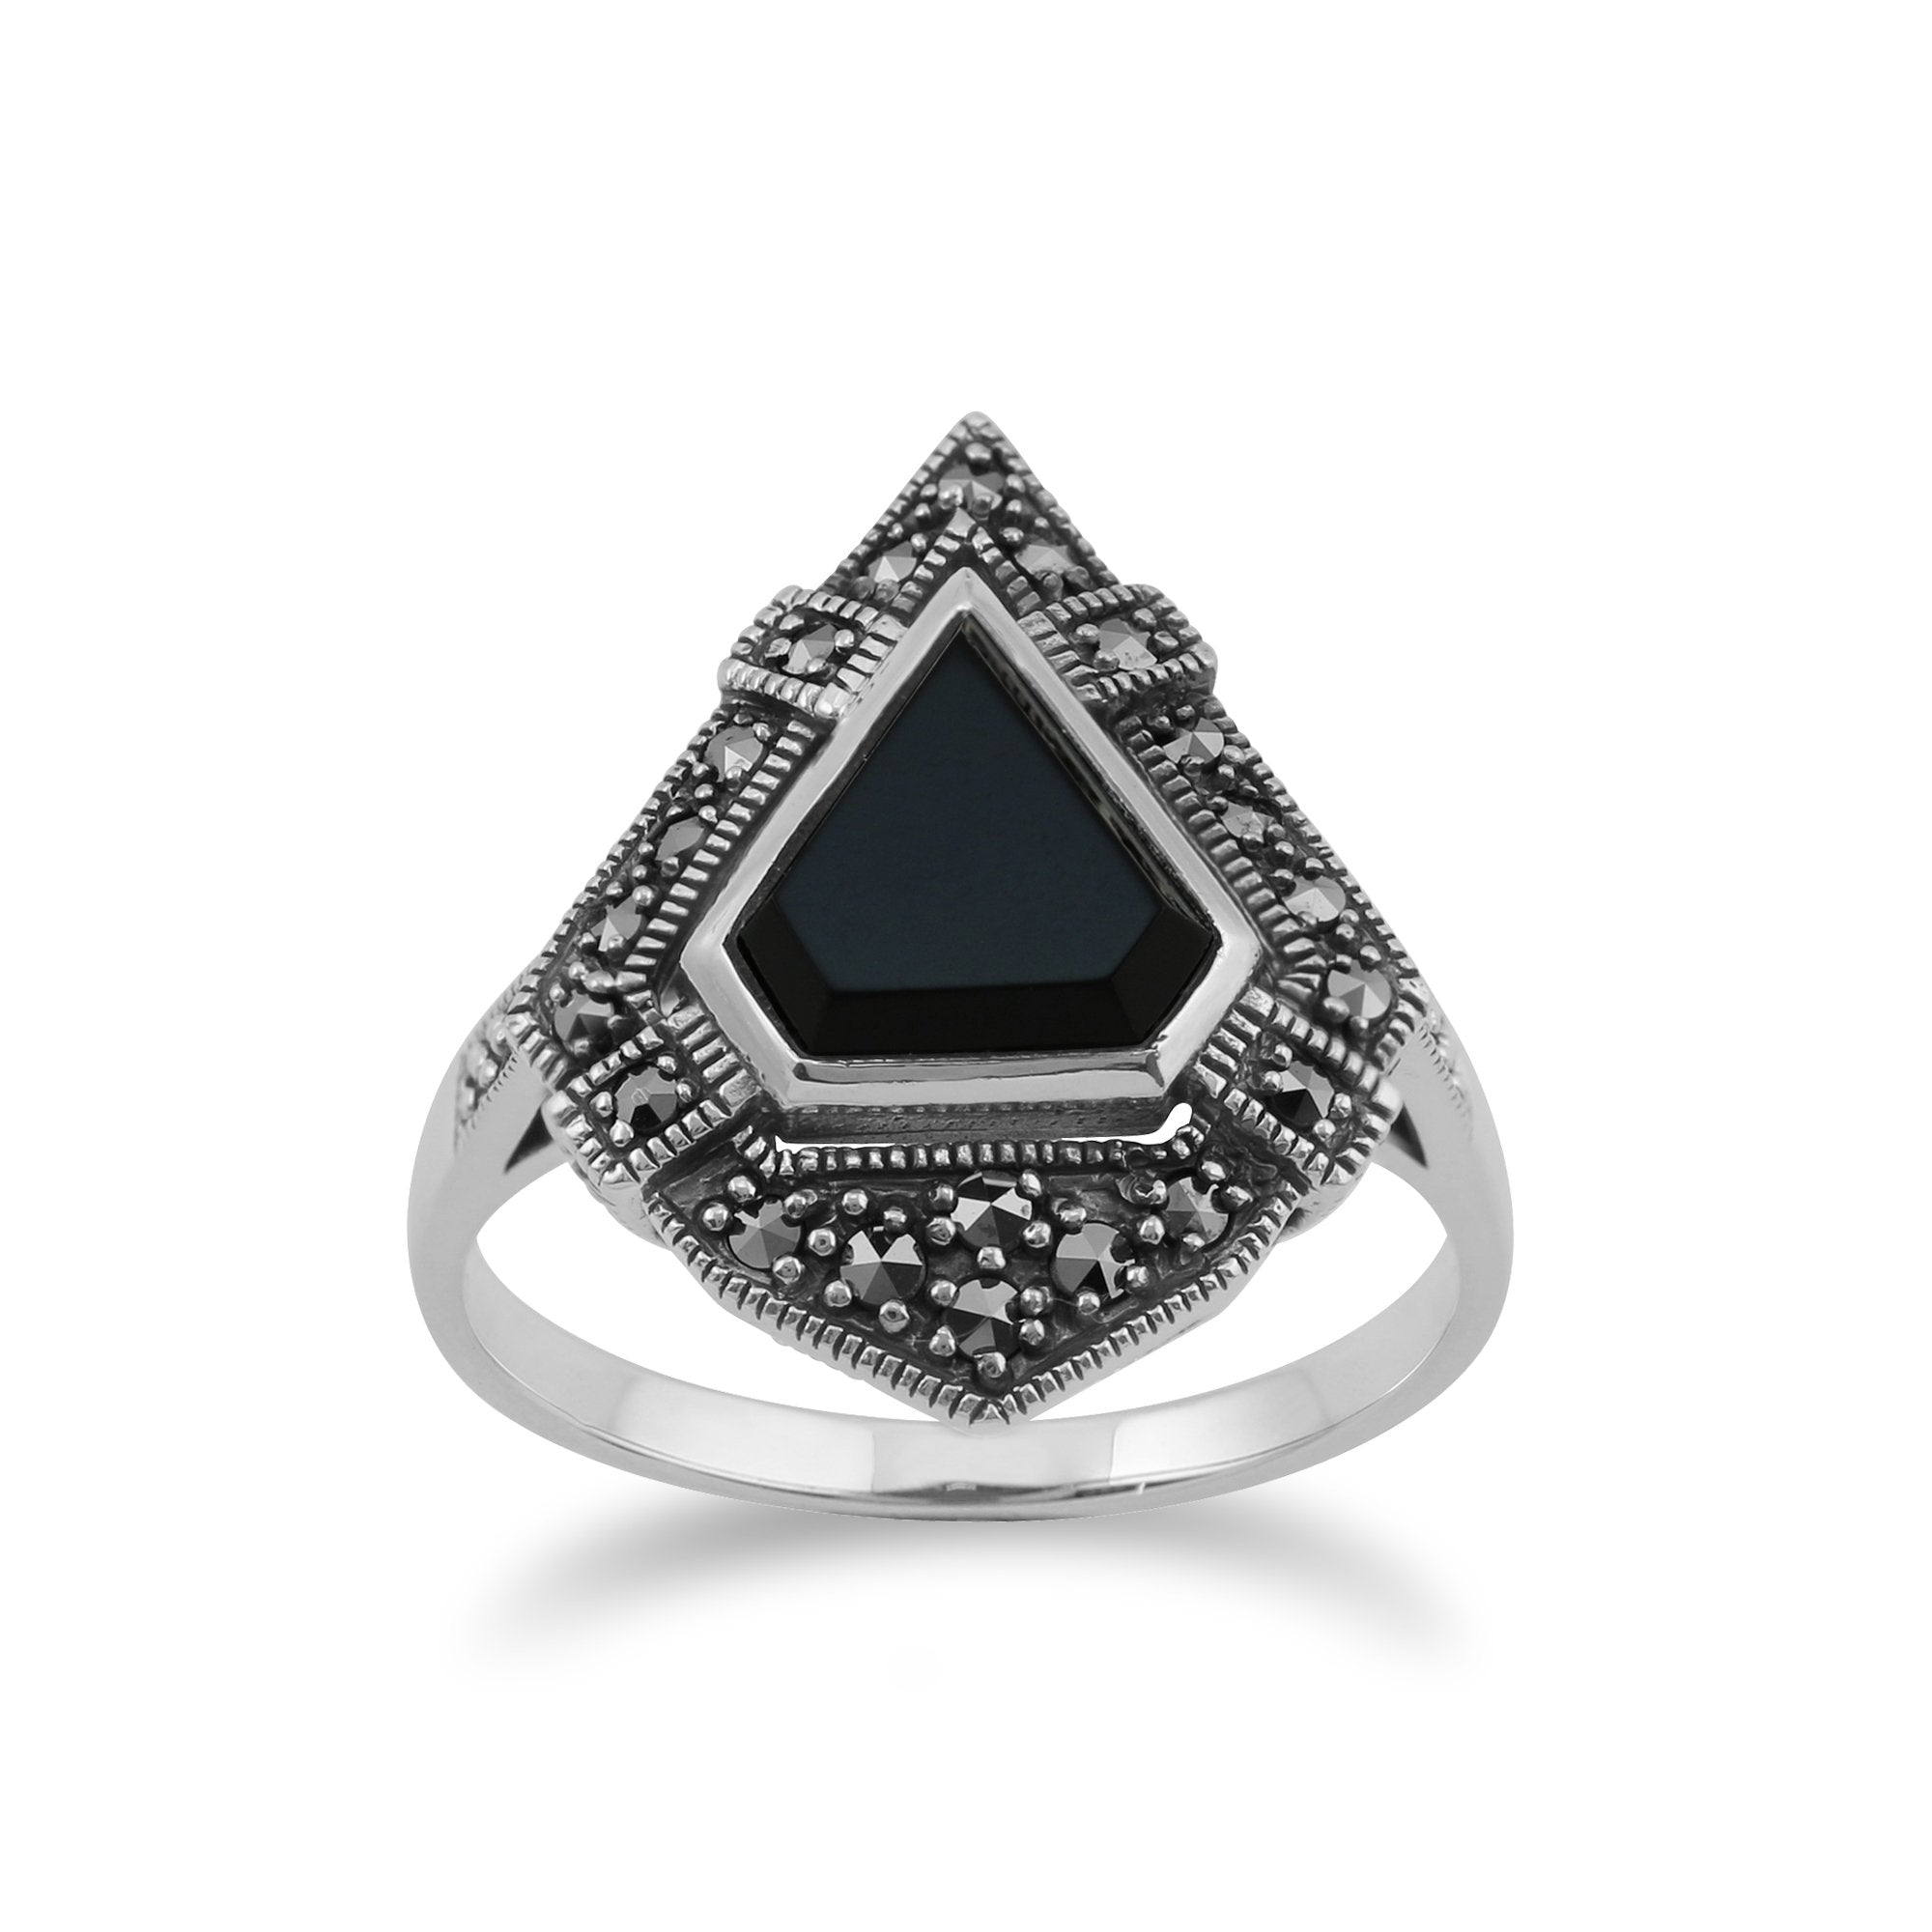 Art Deco Style Triangle Black Onyx & Marcasite Statement Ring in 925 Sterling Silver